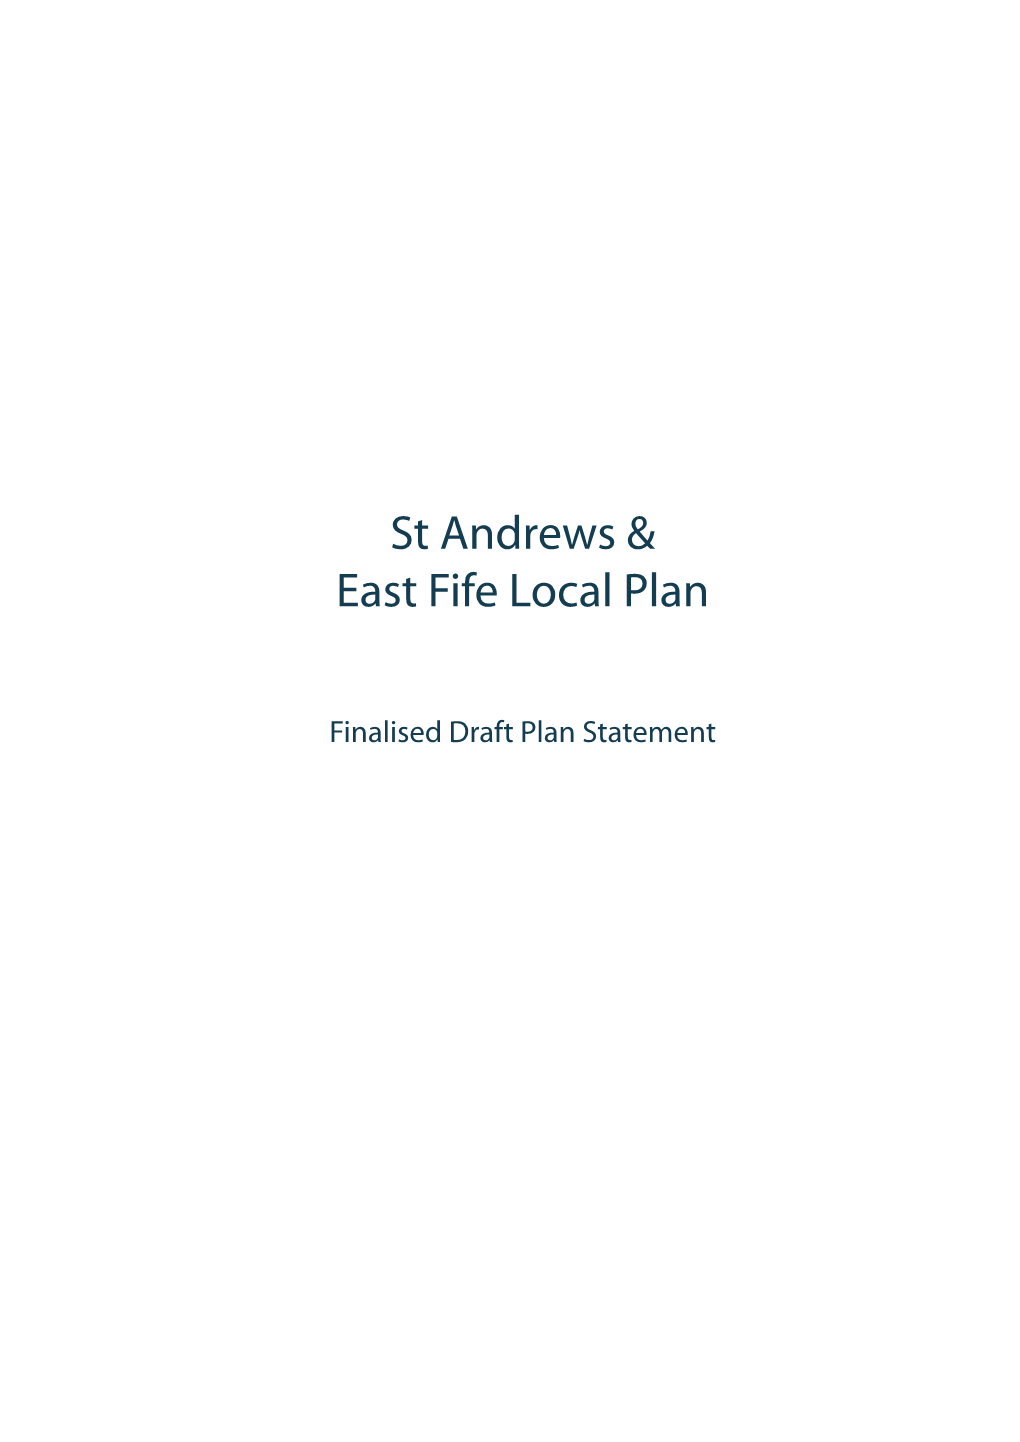 St Andrews & East Fife Local Plan